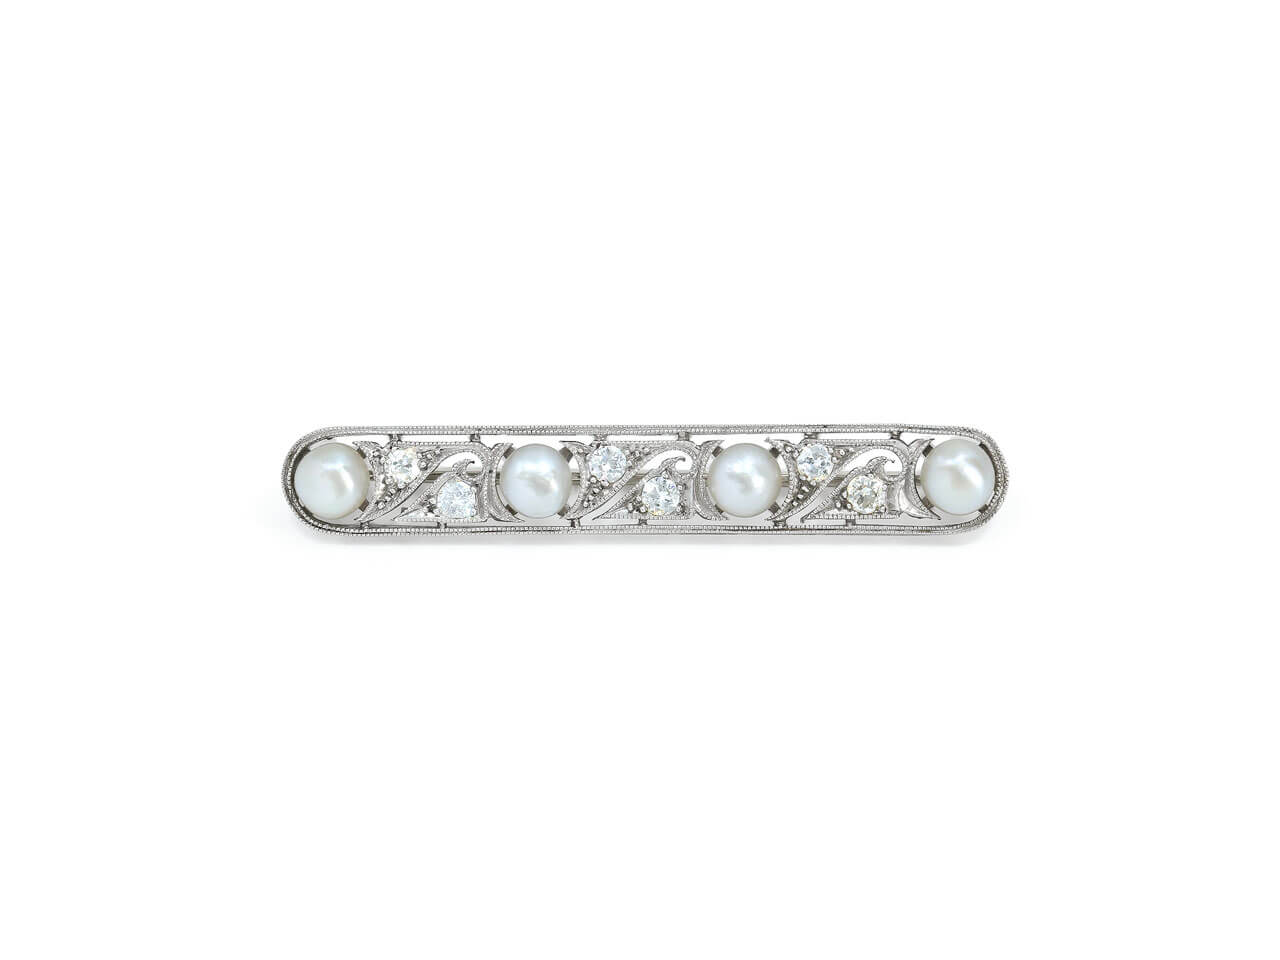 Antique Natural Pearl and Diamond Brooch in Platinum, by Black Starr & Frost